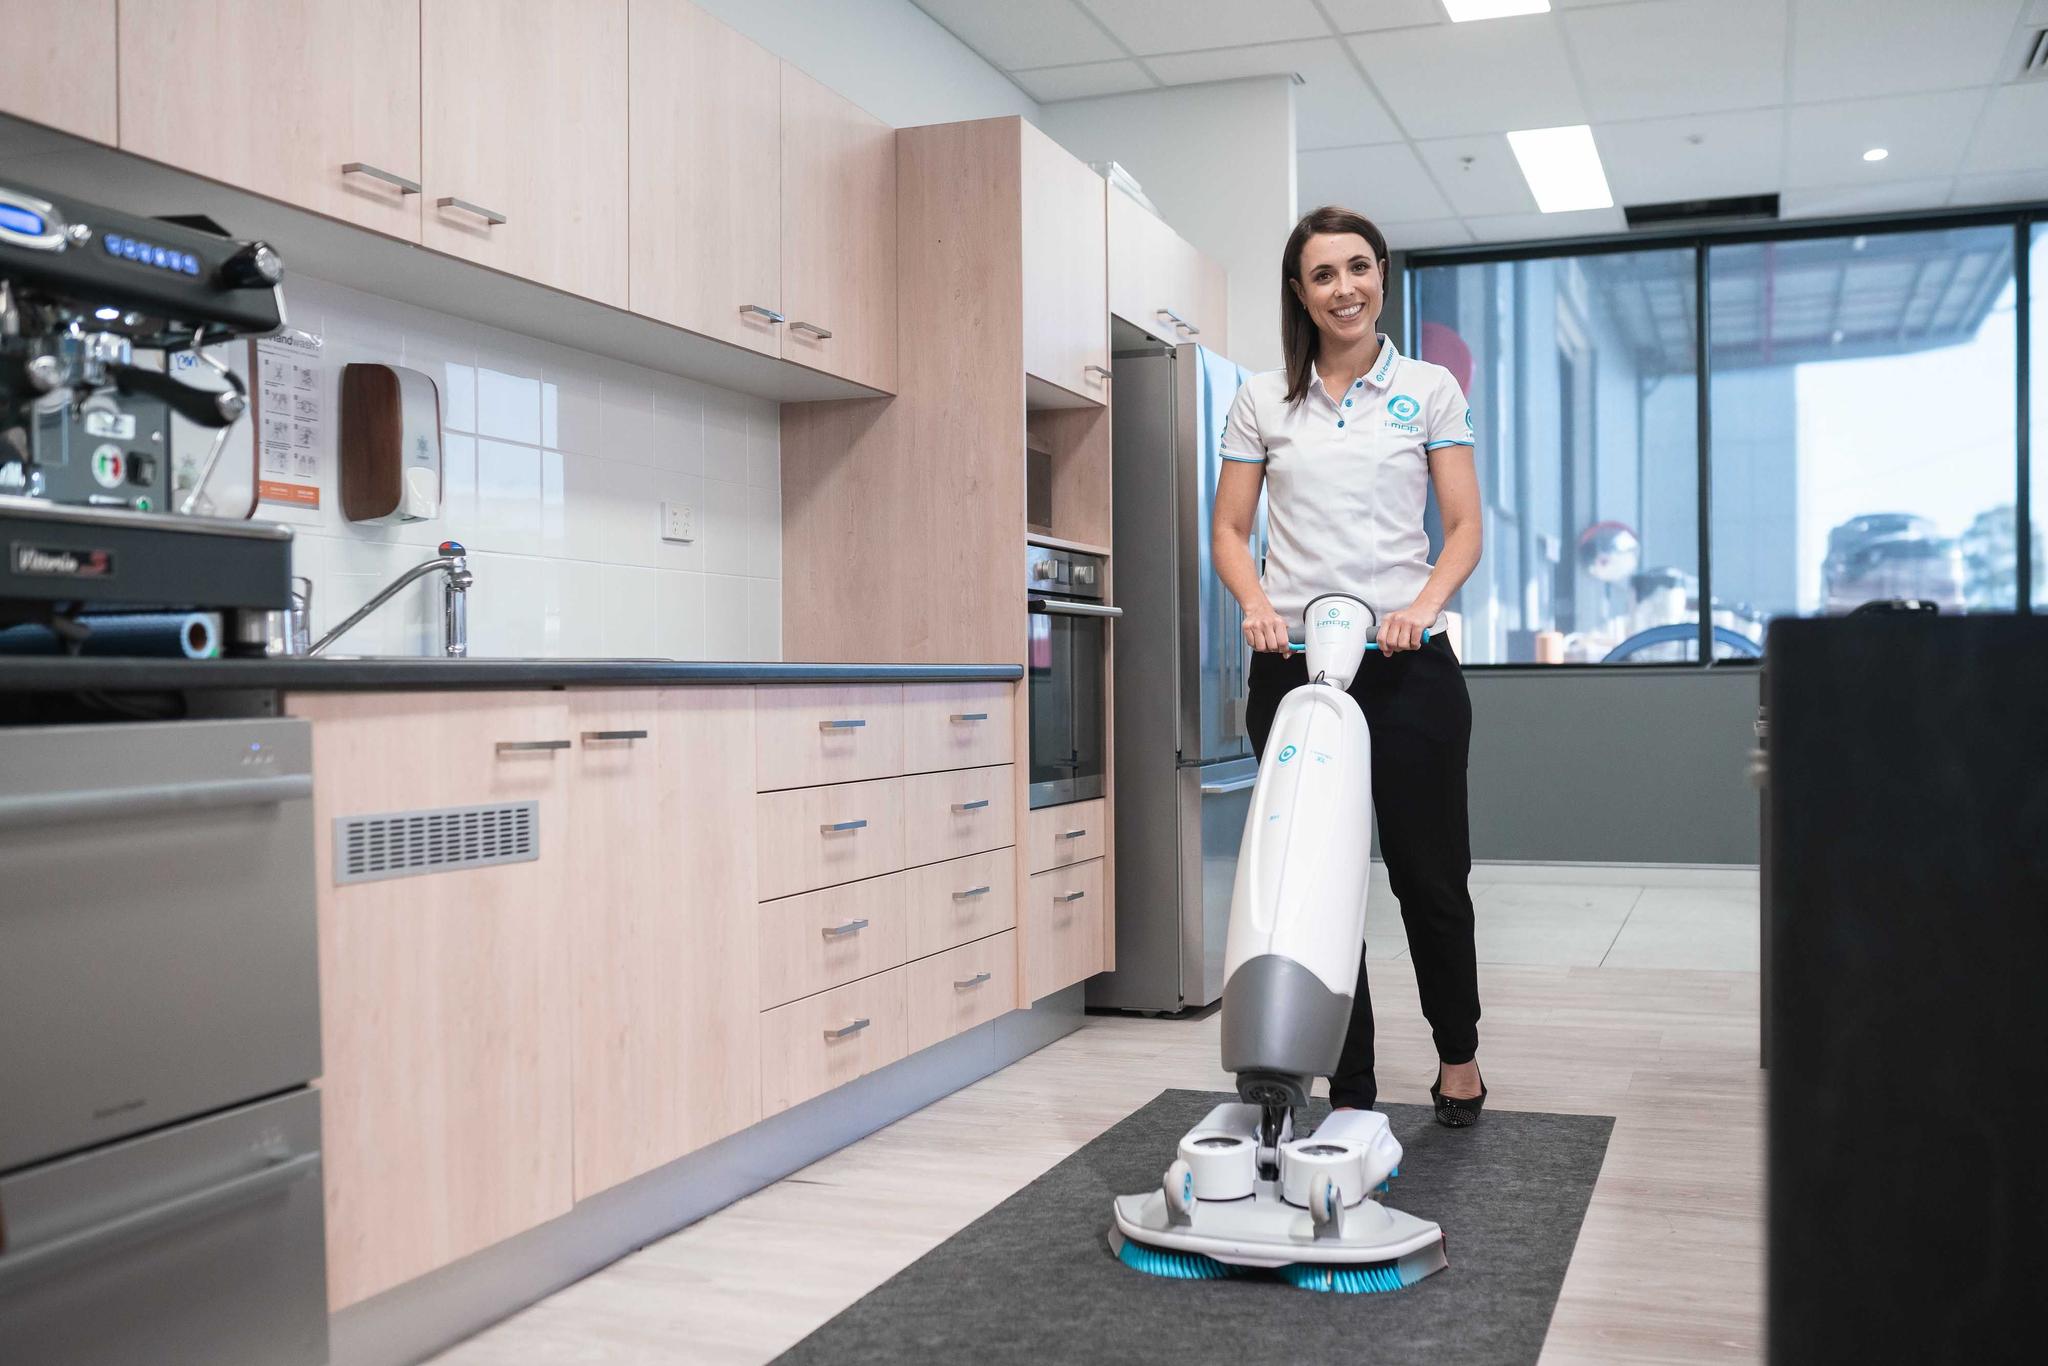 How To Clean Floors With The i-mop